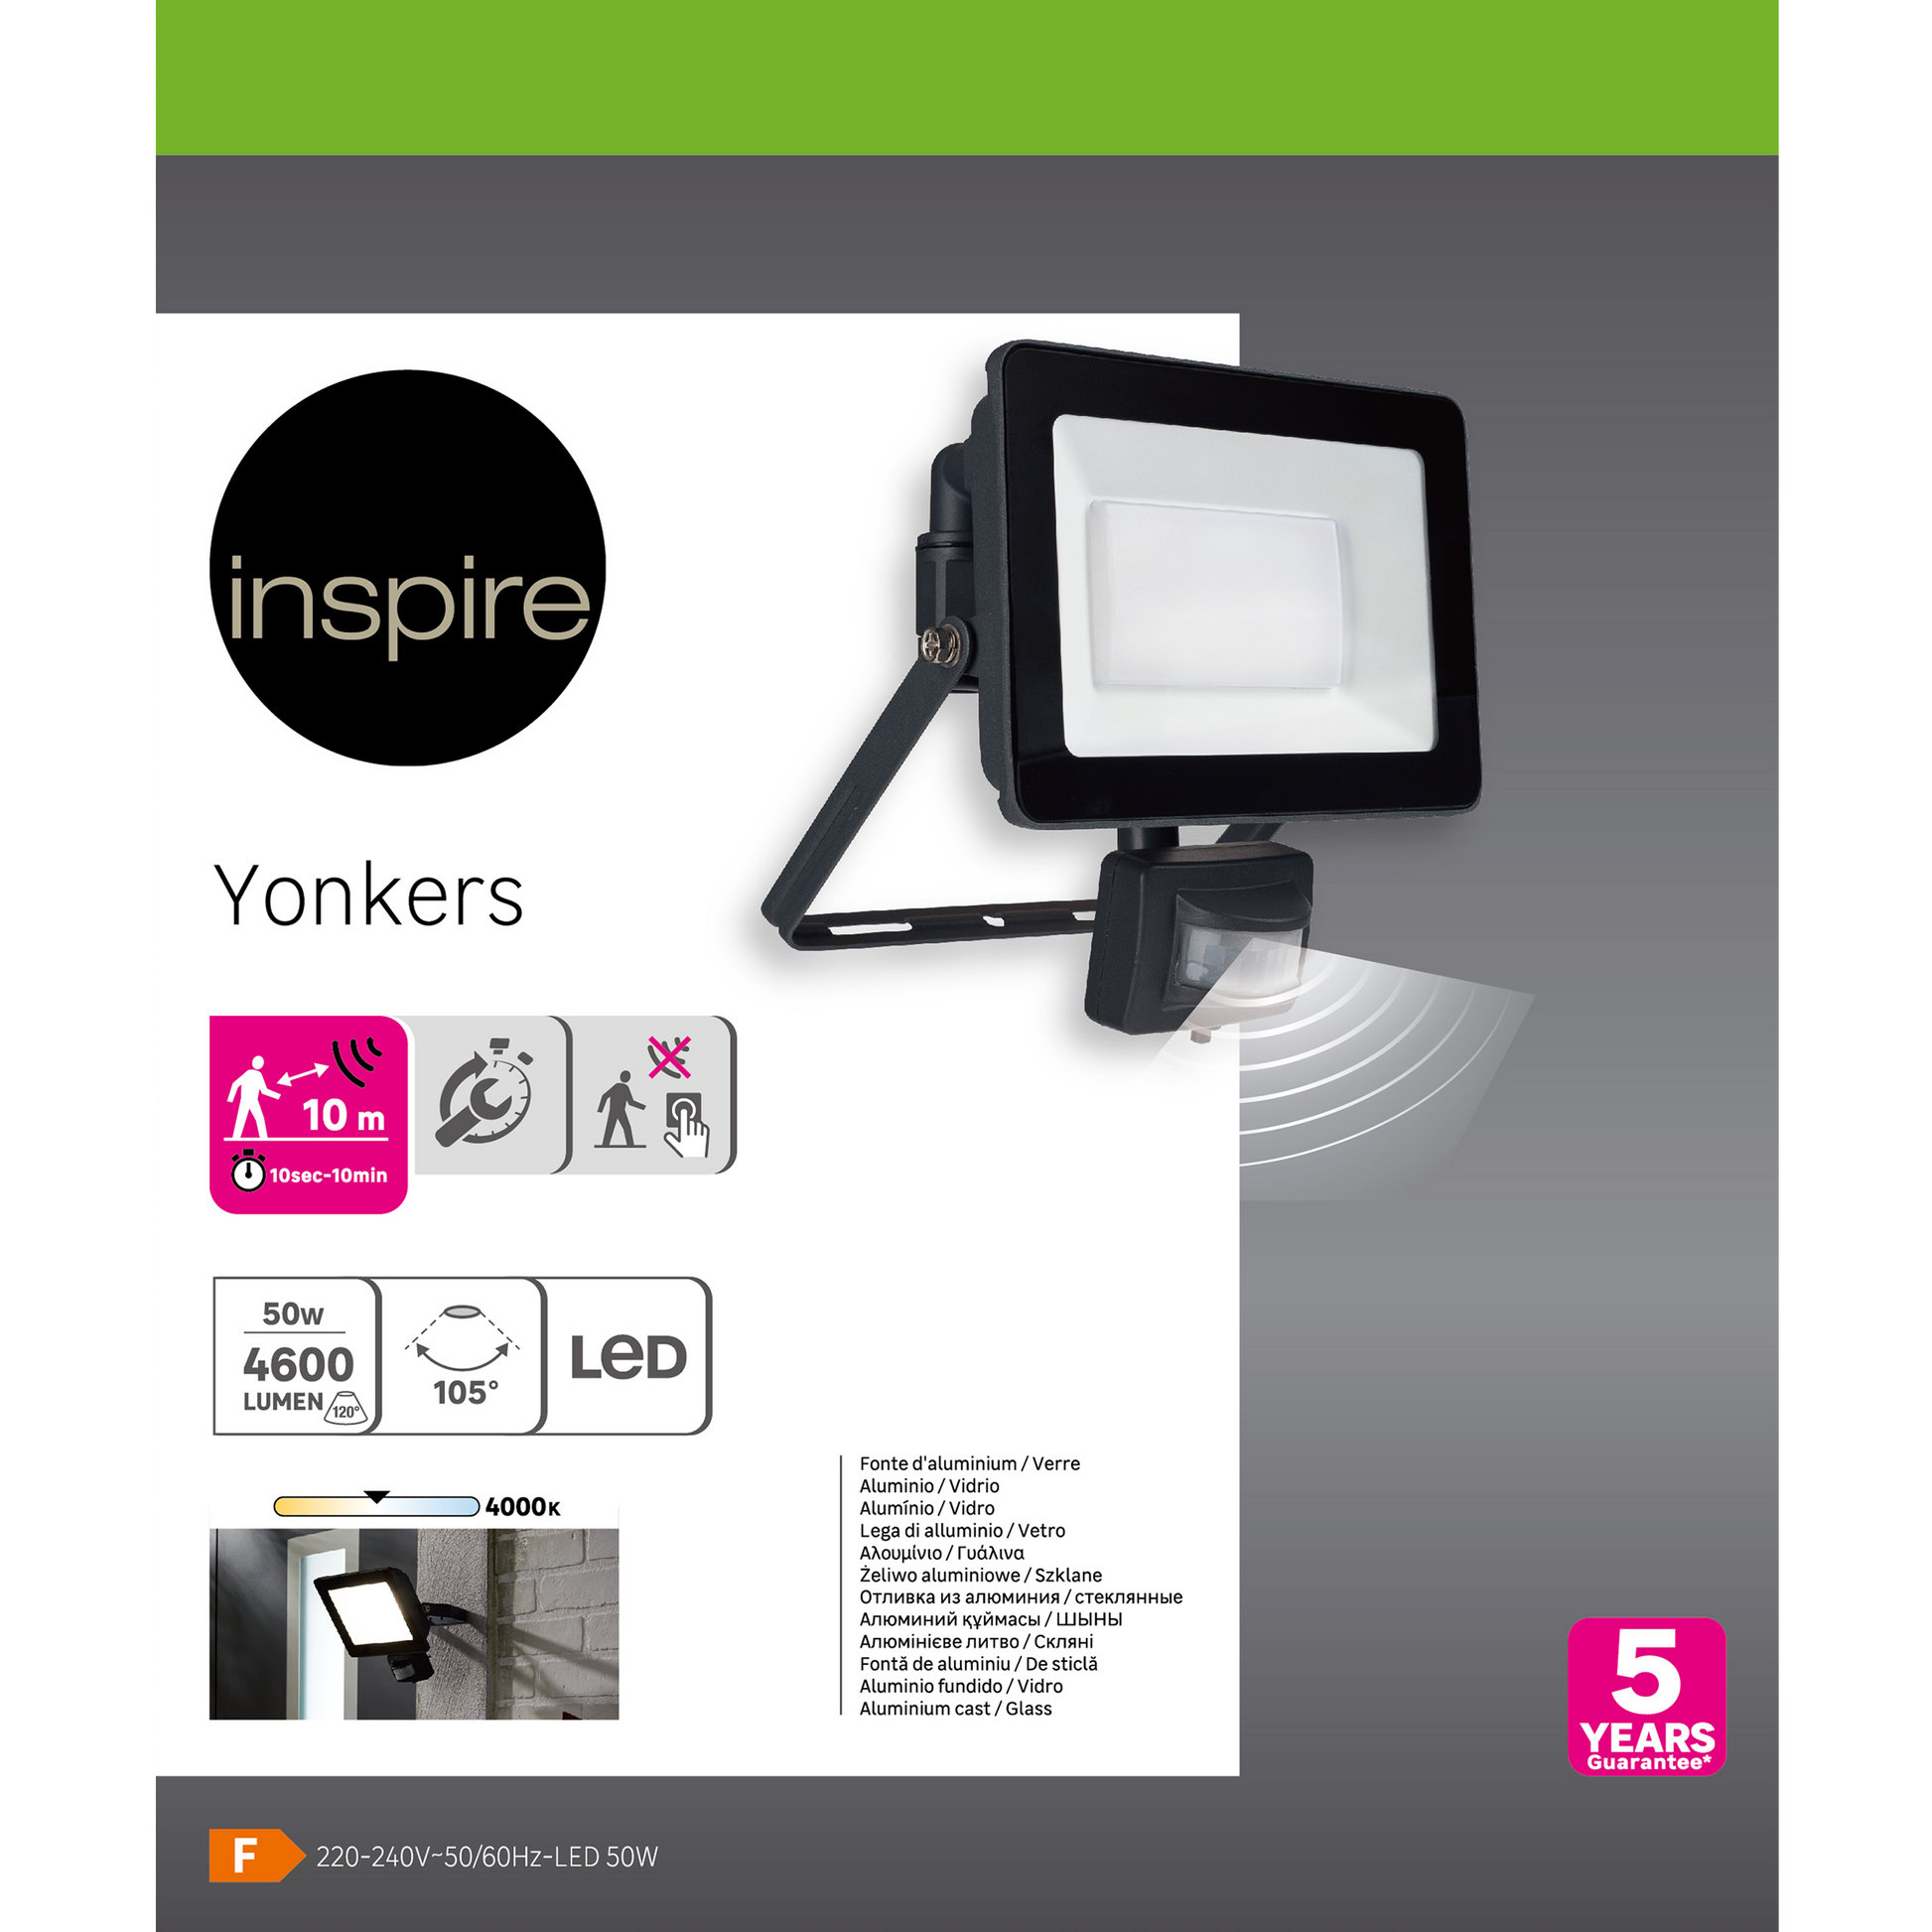 YONKERS ALUMINIUM PROJECTOR GREY LED 50W WITH MOTION SENSOR - best price from Maltashopper.com BR420001418